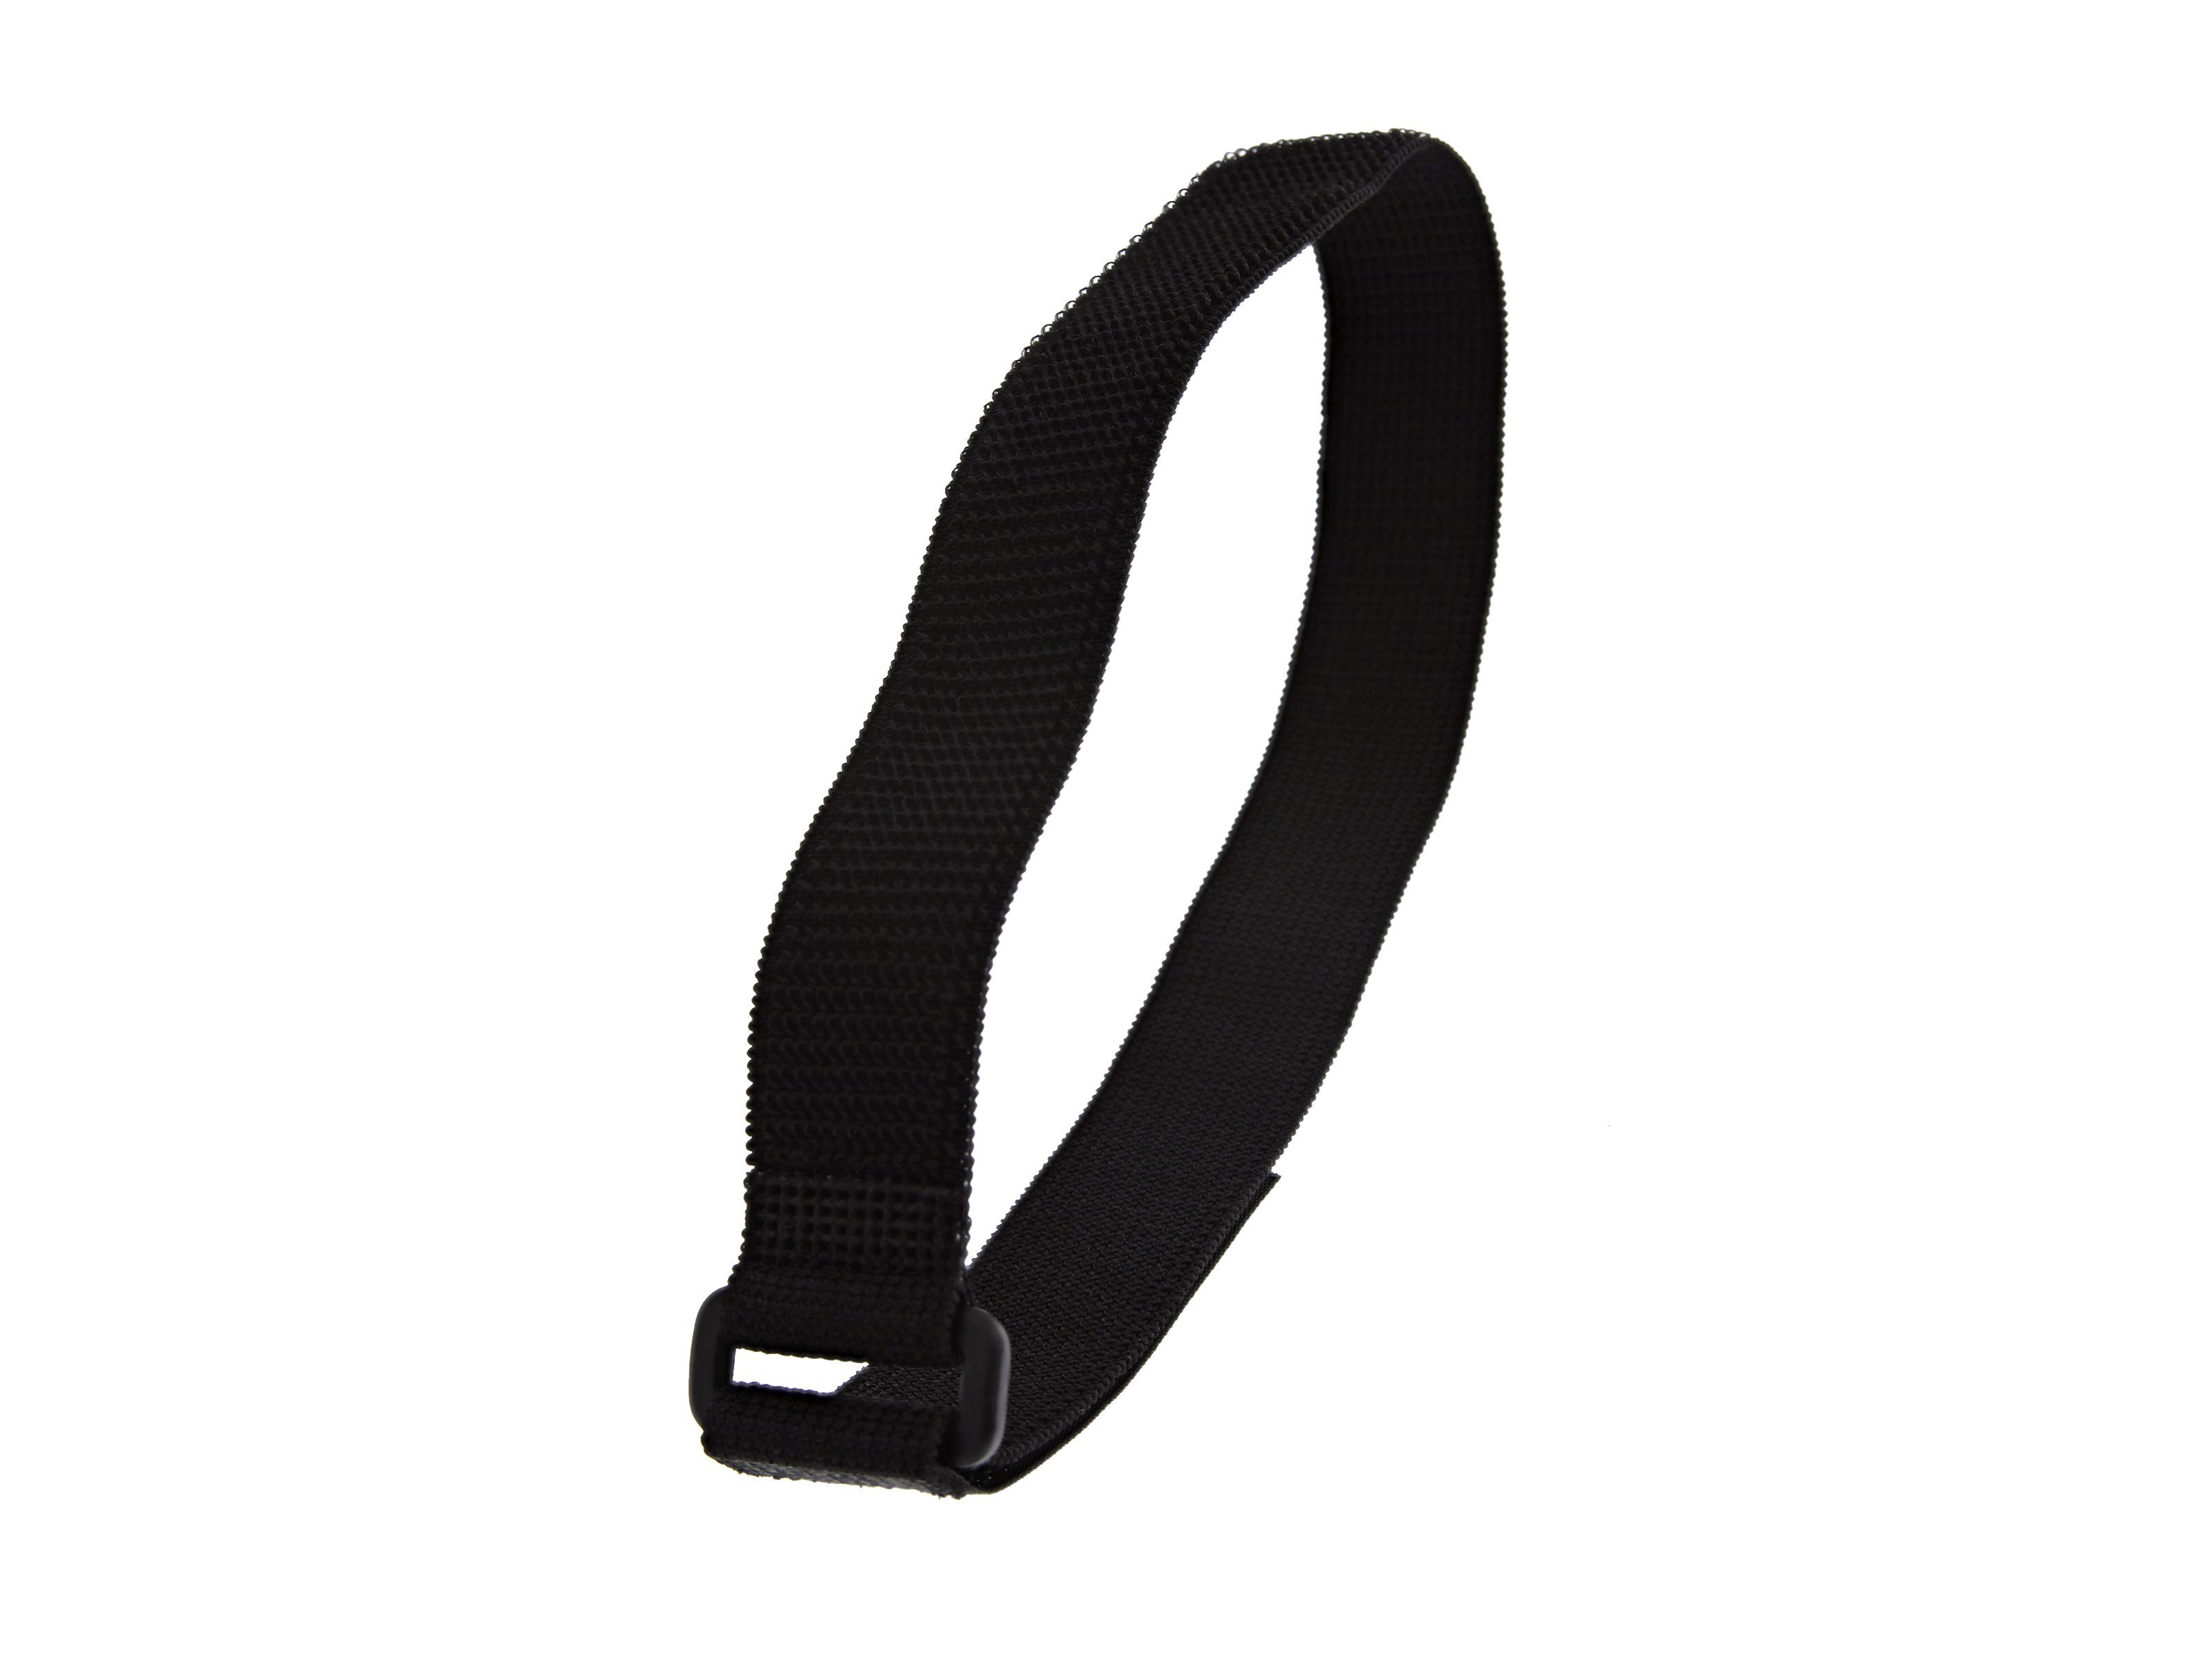 All Purpose Elastic Cinch Strap - 20 x 1 Inch - 5 Pack at Cables N More